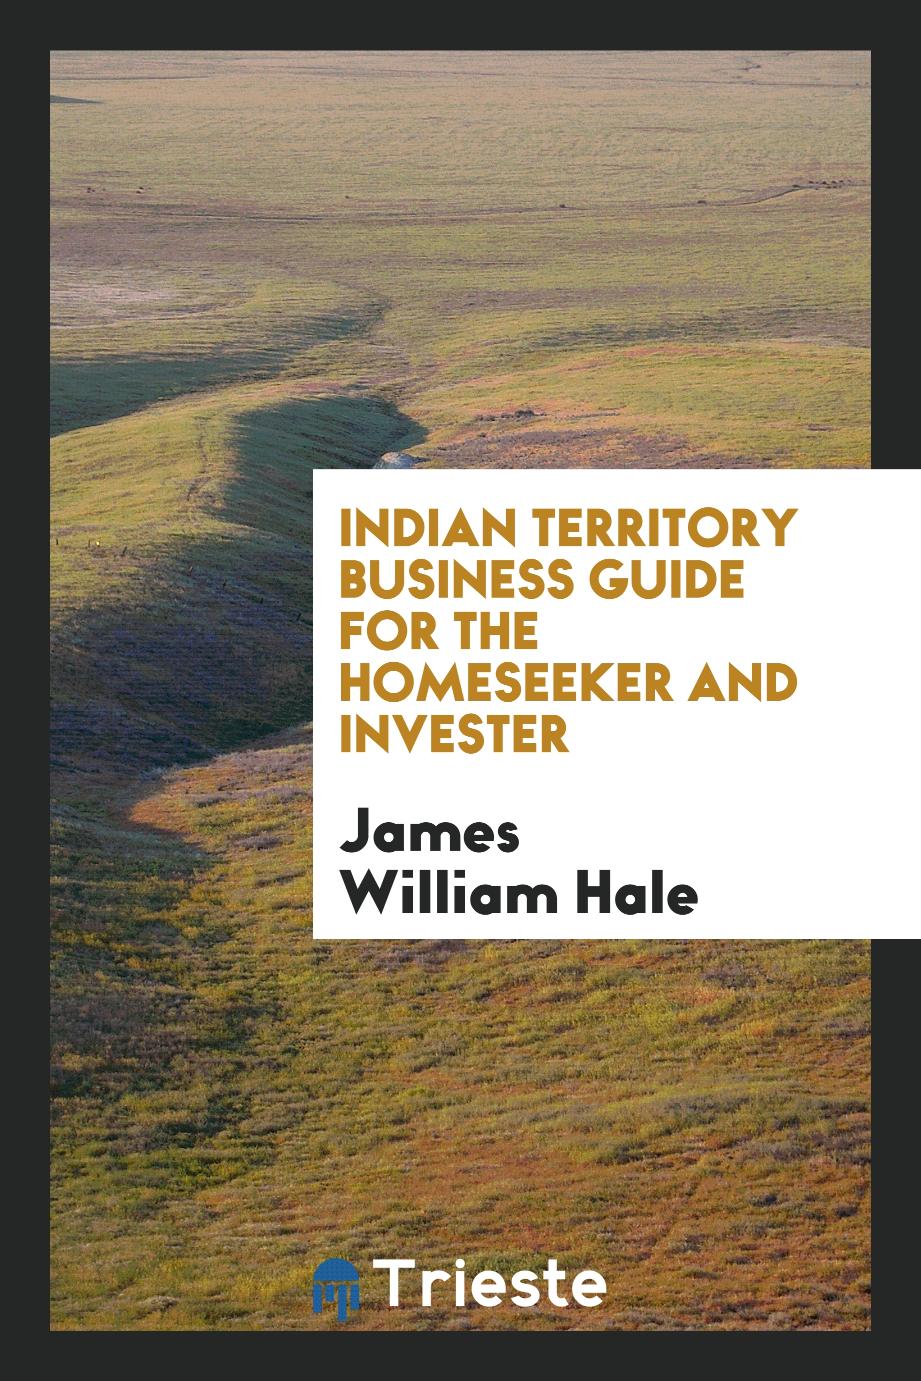 Indian Territory business guide for the homeseeker and invester